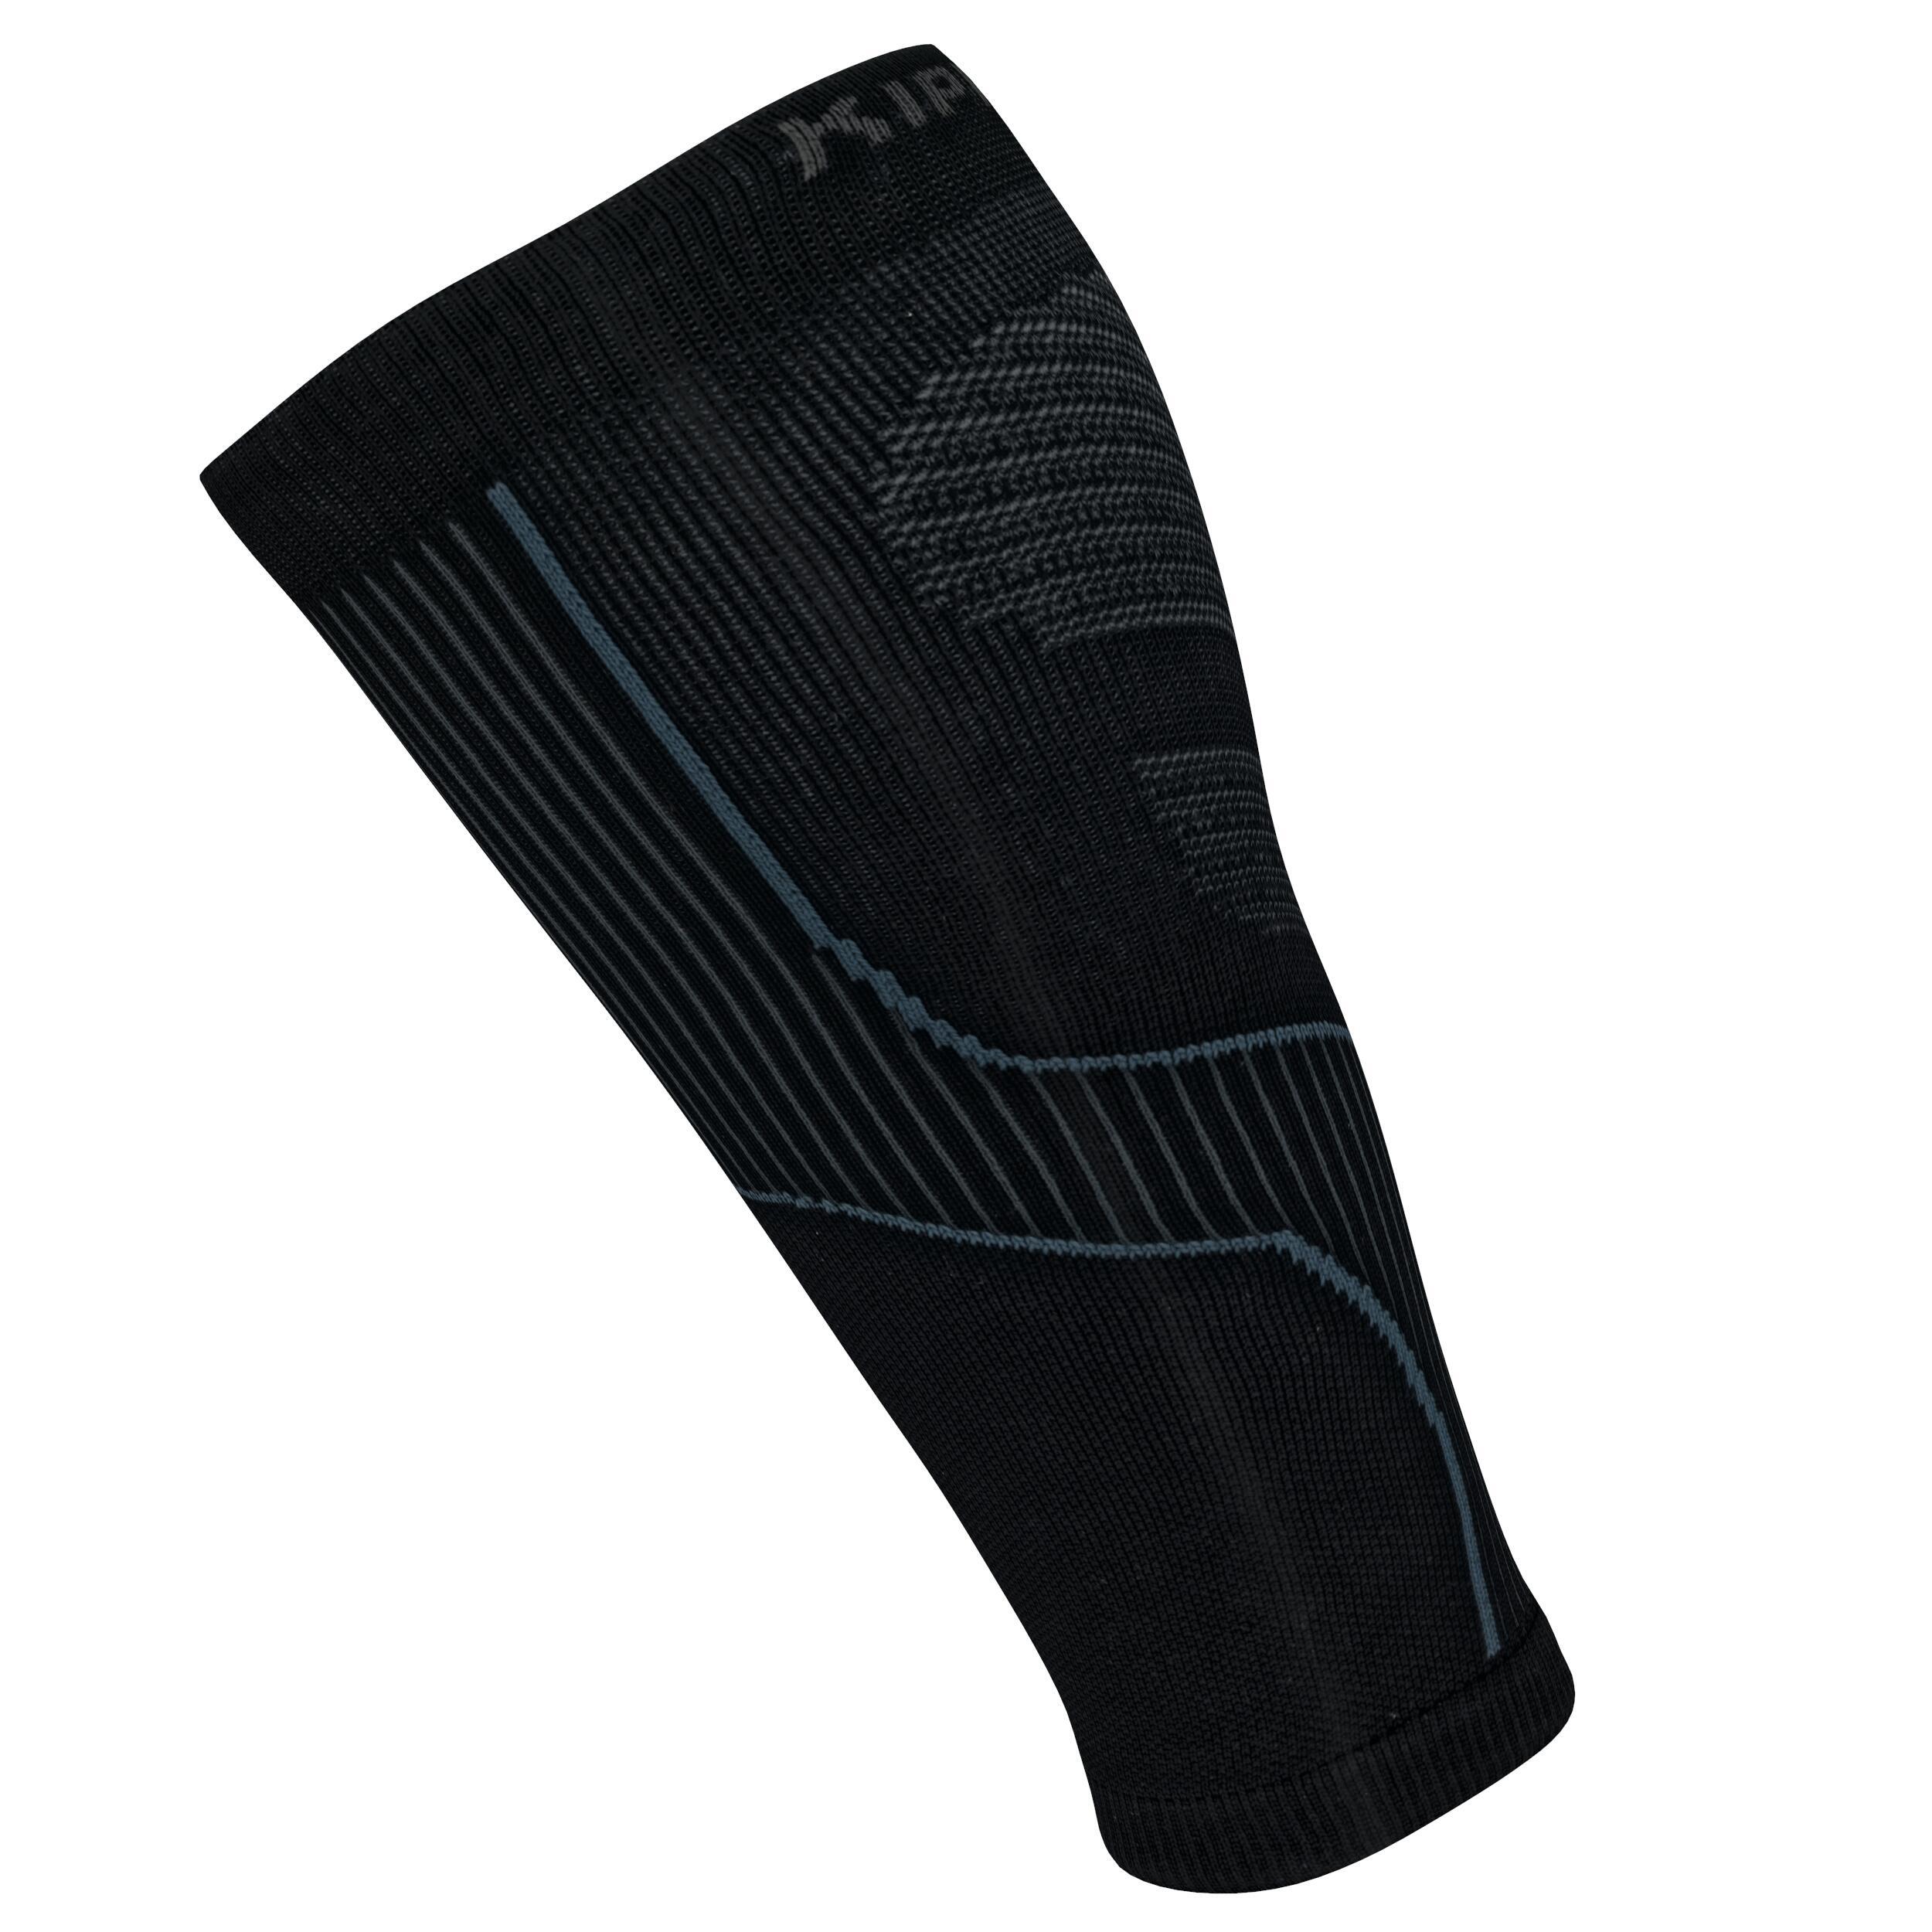 RUNNING COMPRESSION SLEEVES - BLACK 2/6